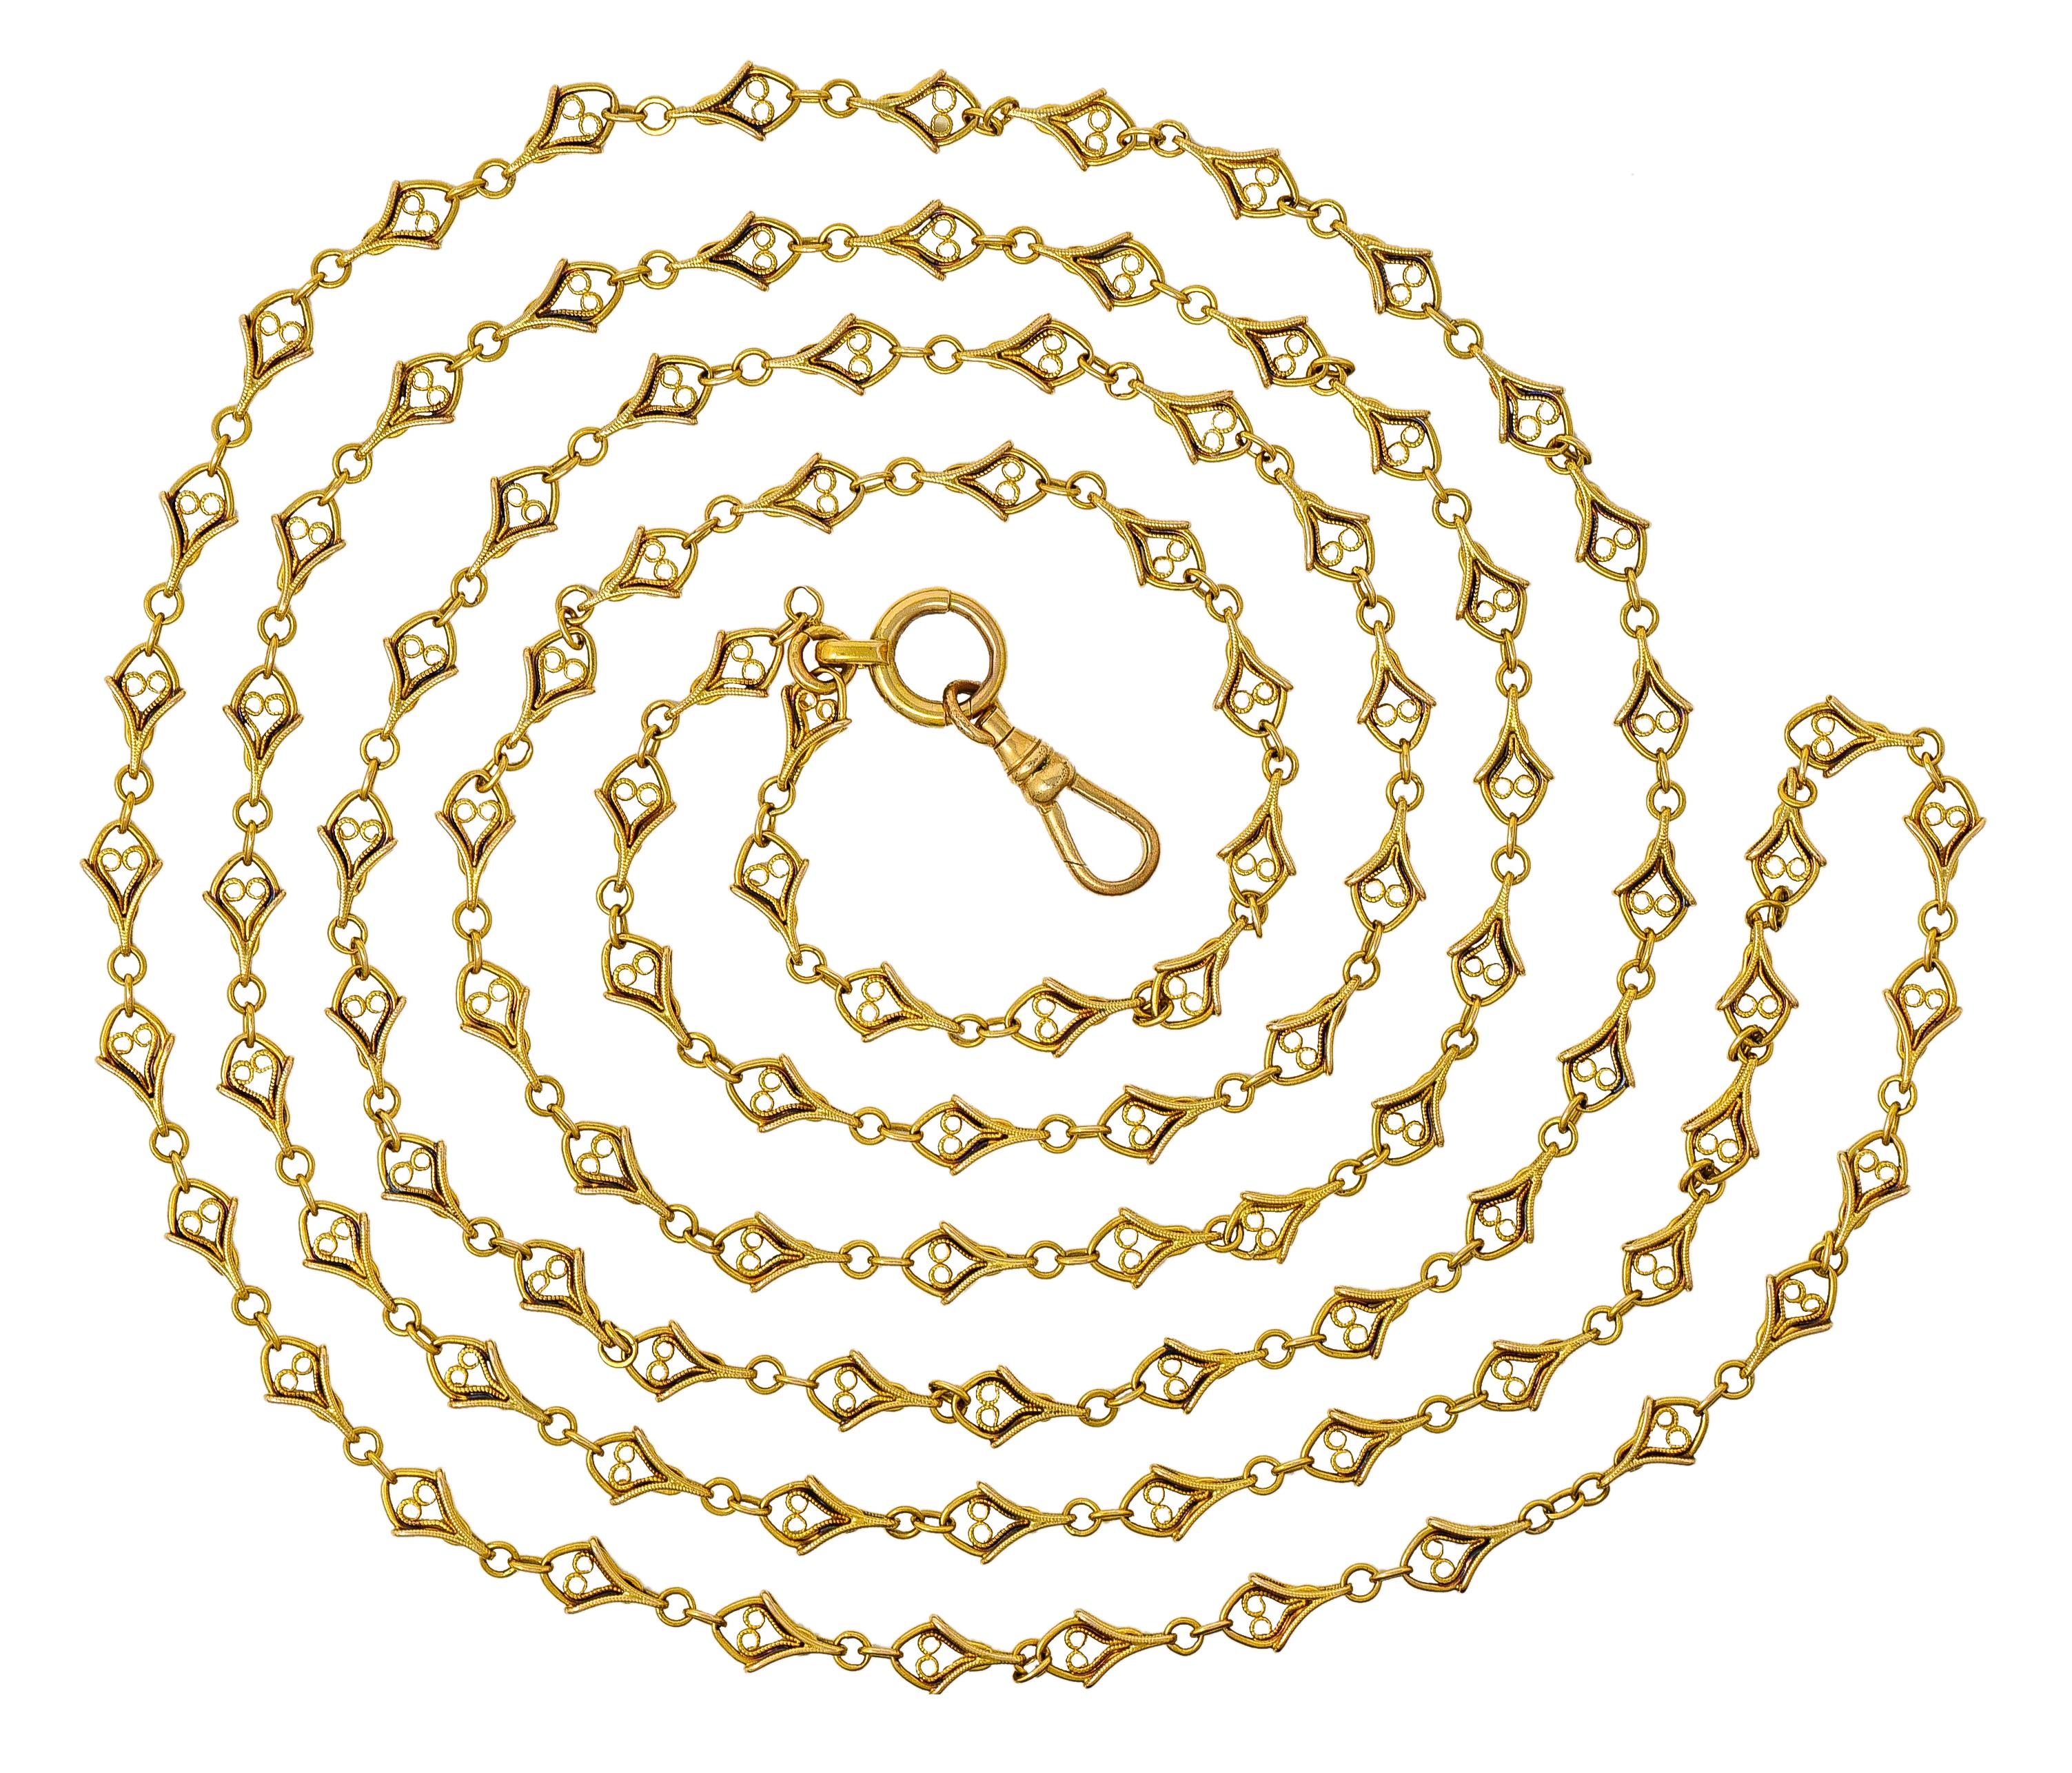 Eternity necklace is comprised of stylized chain links centering filigree heart motifs. With round and oval spacer links. Completed by large spring clasp ring and lobster clasp. Tested with French hallmarks for 18 karat gold. Circa: 1860's. Length: